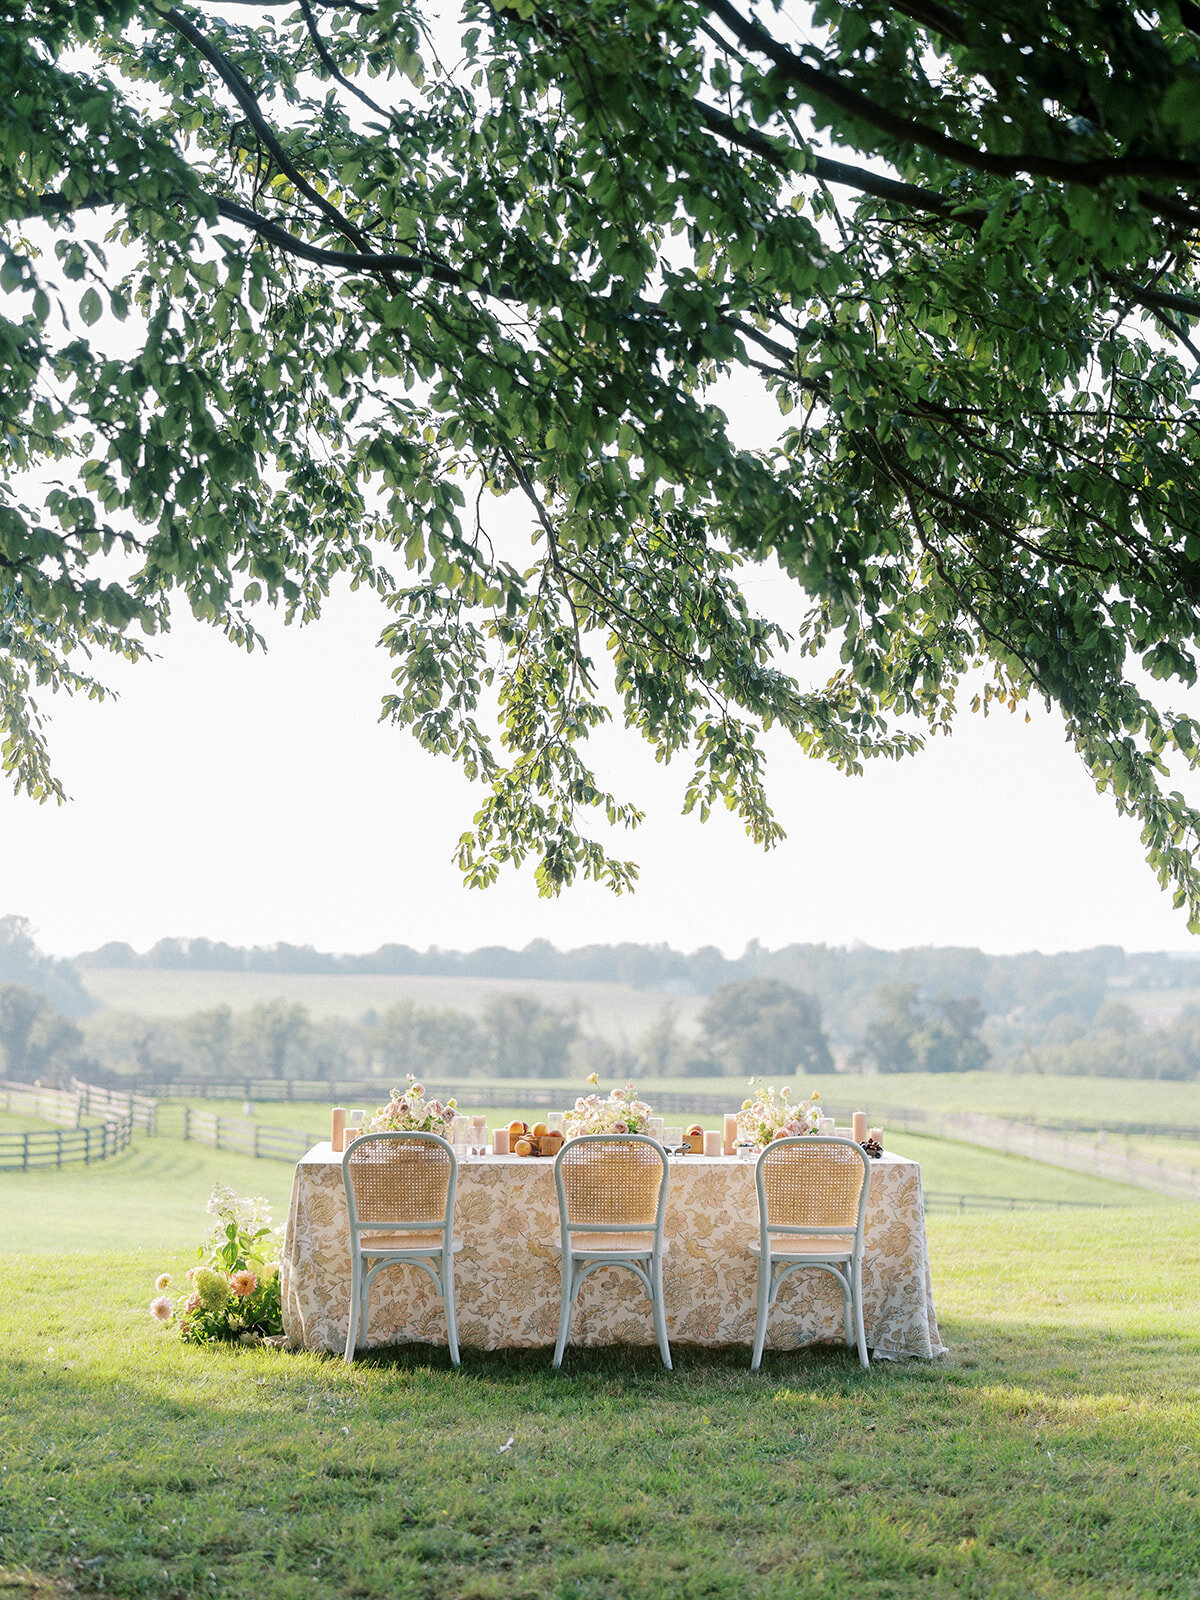 Long table with patterned linen sat upon a hill overlooking green pastures.